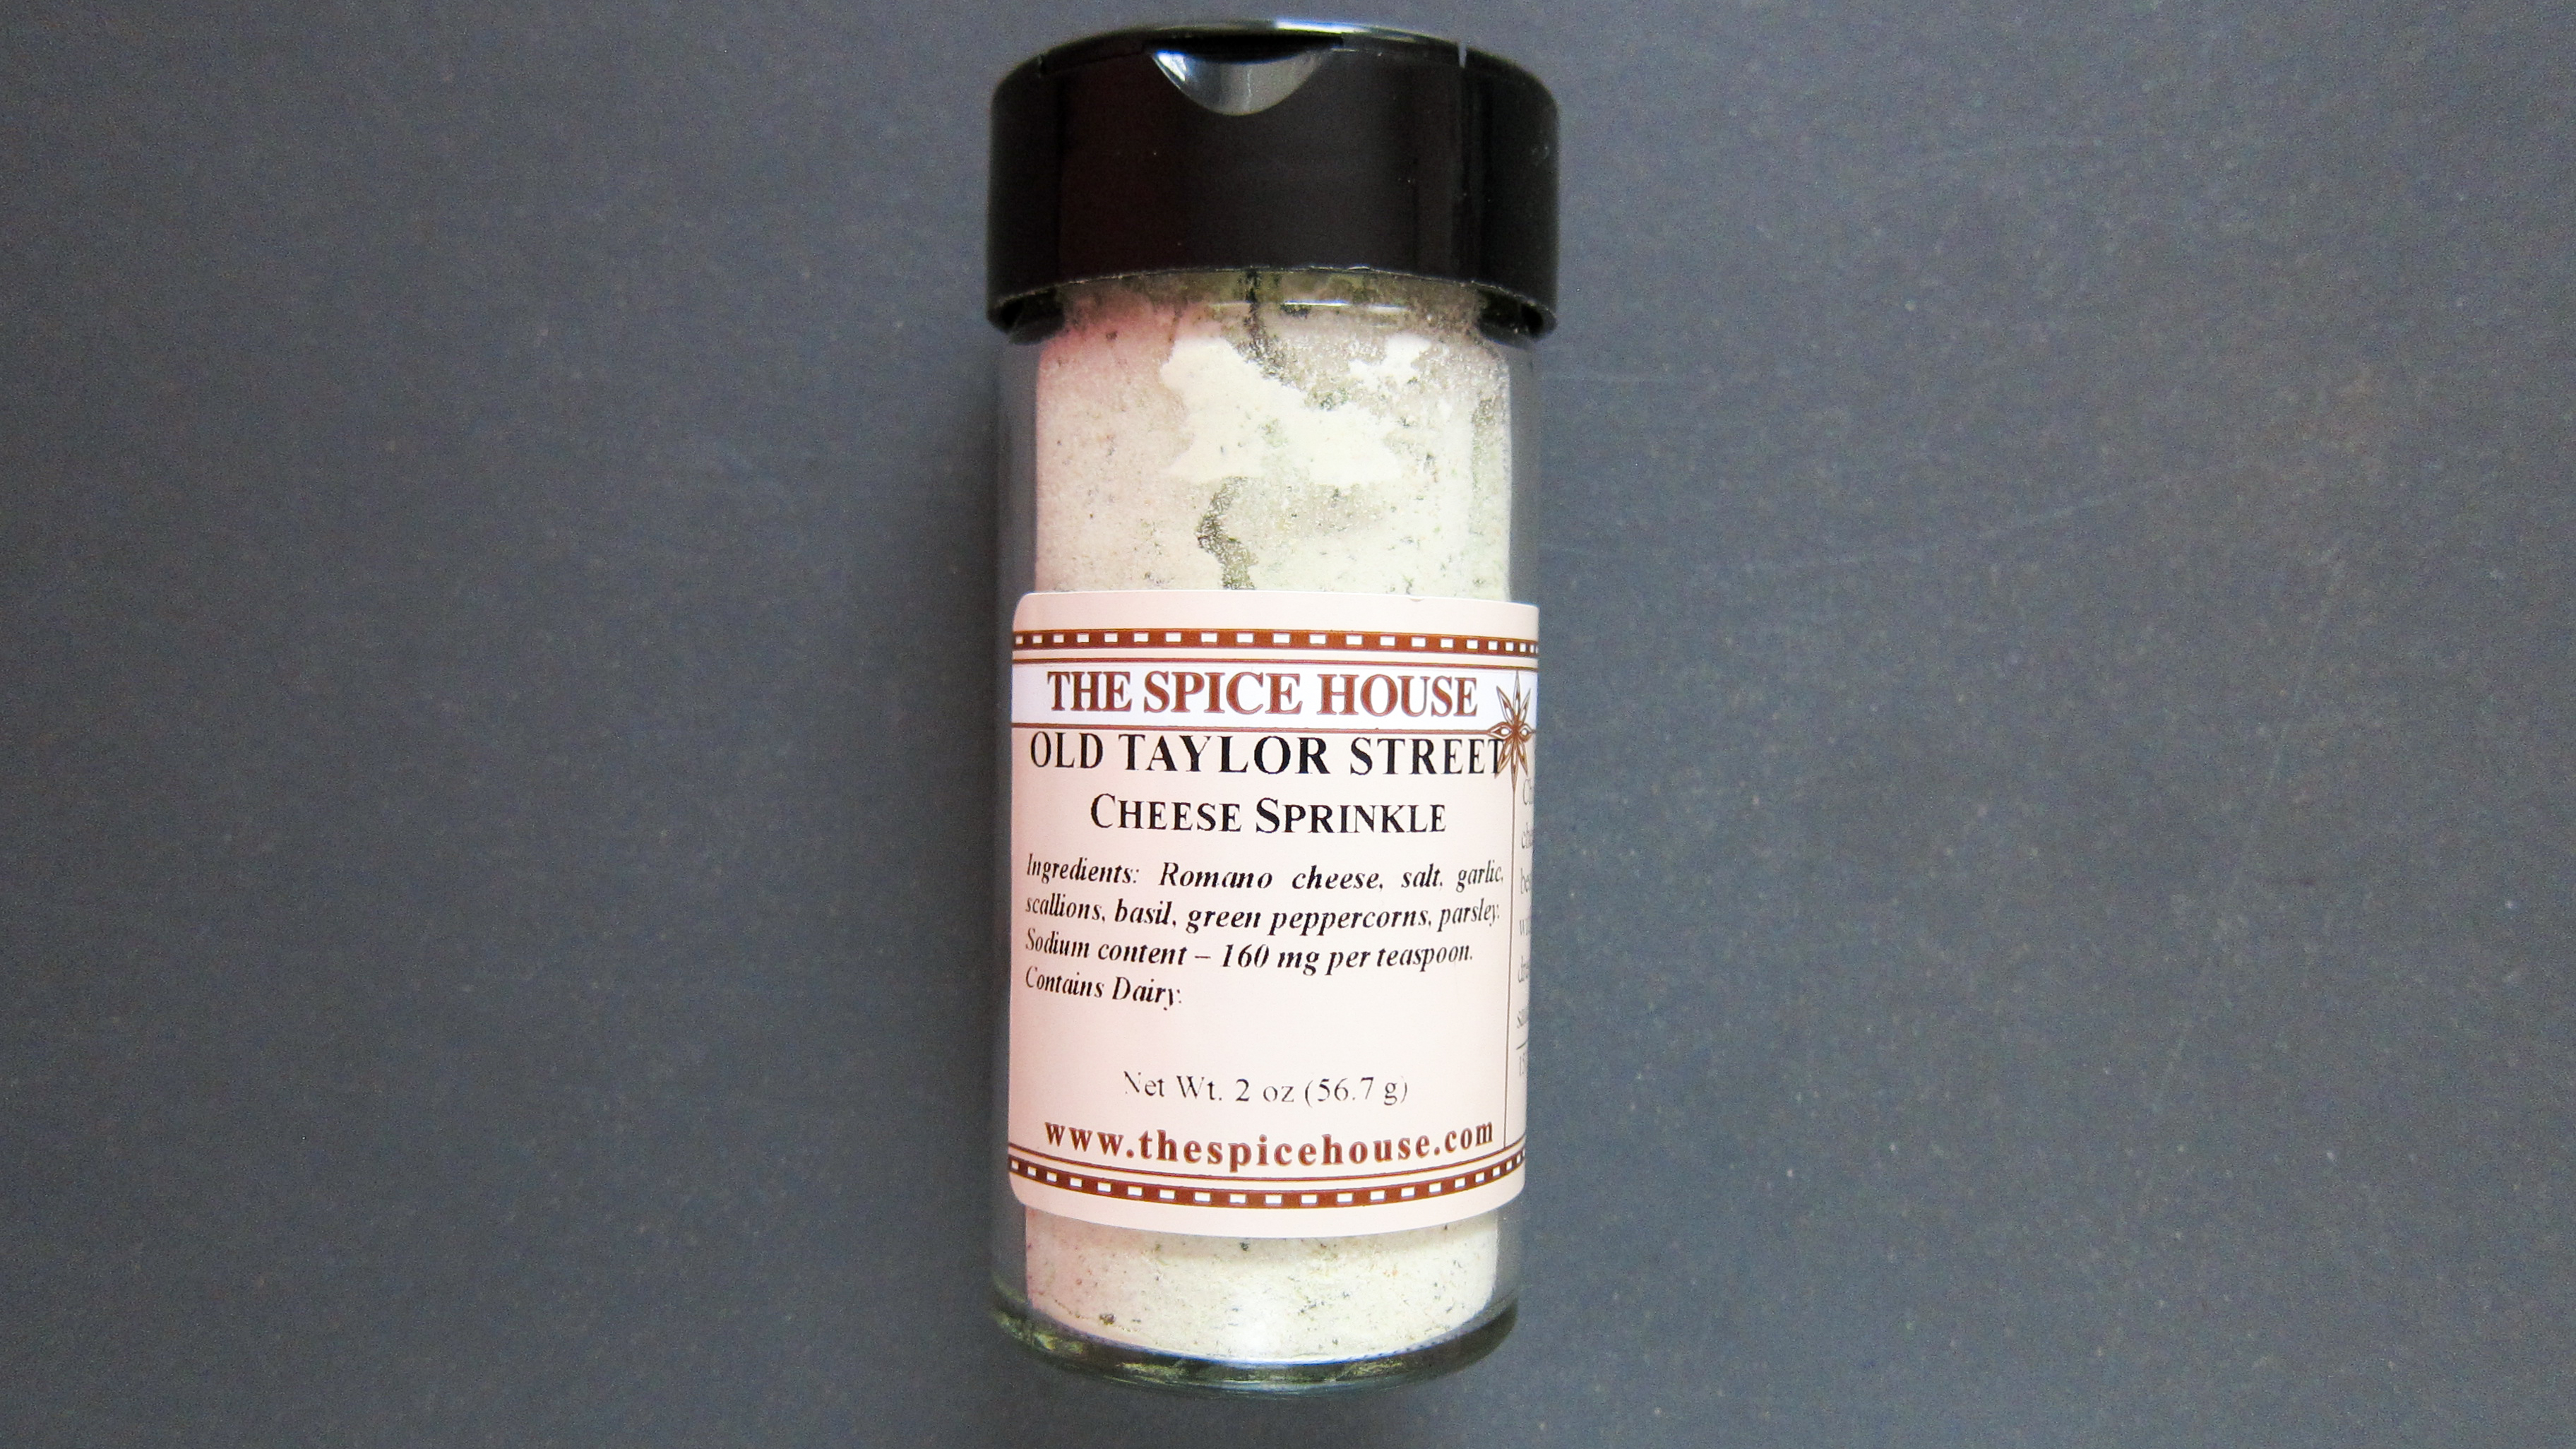 The Spice House Old Taylor Street Cheese Sprinkle